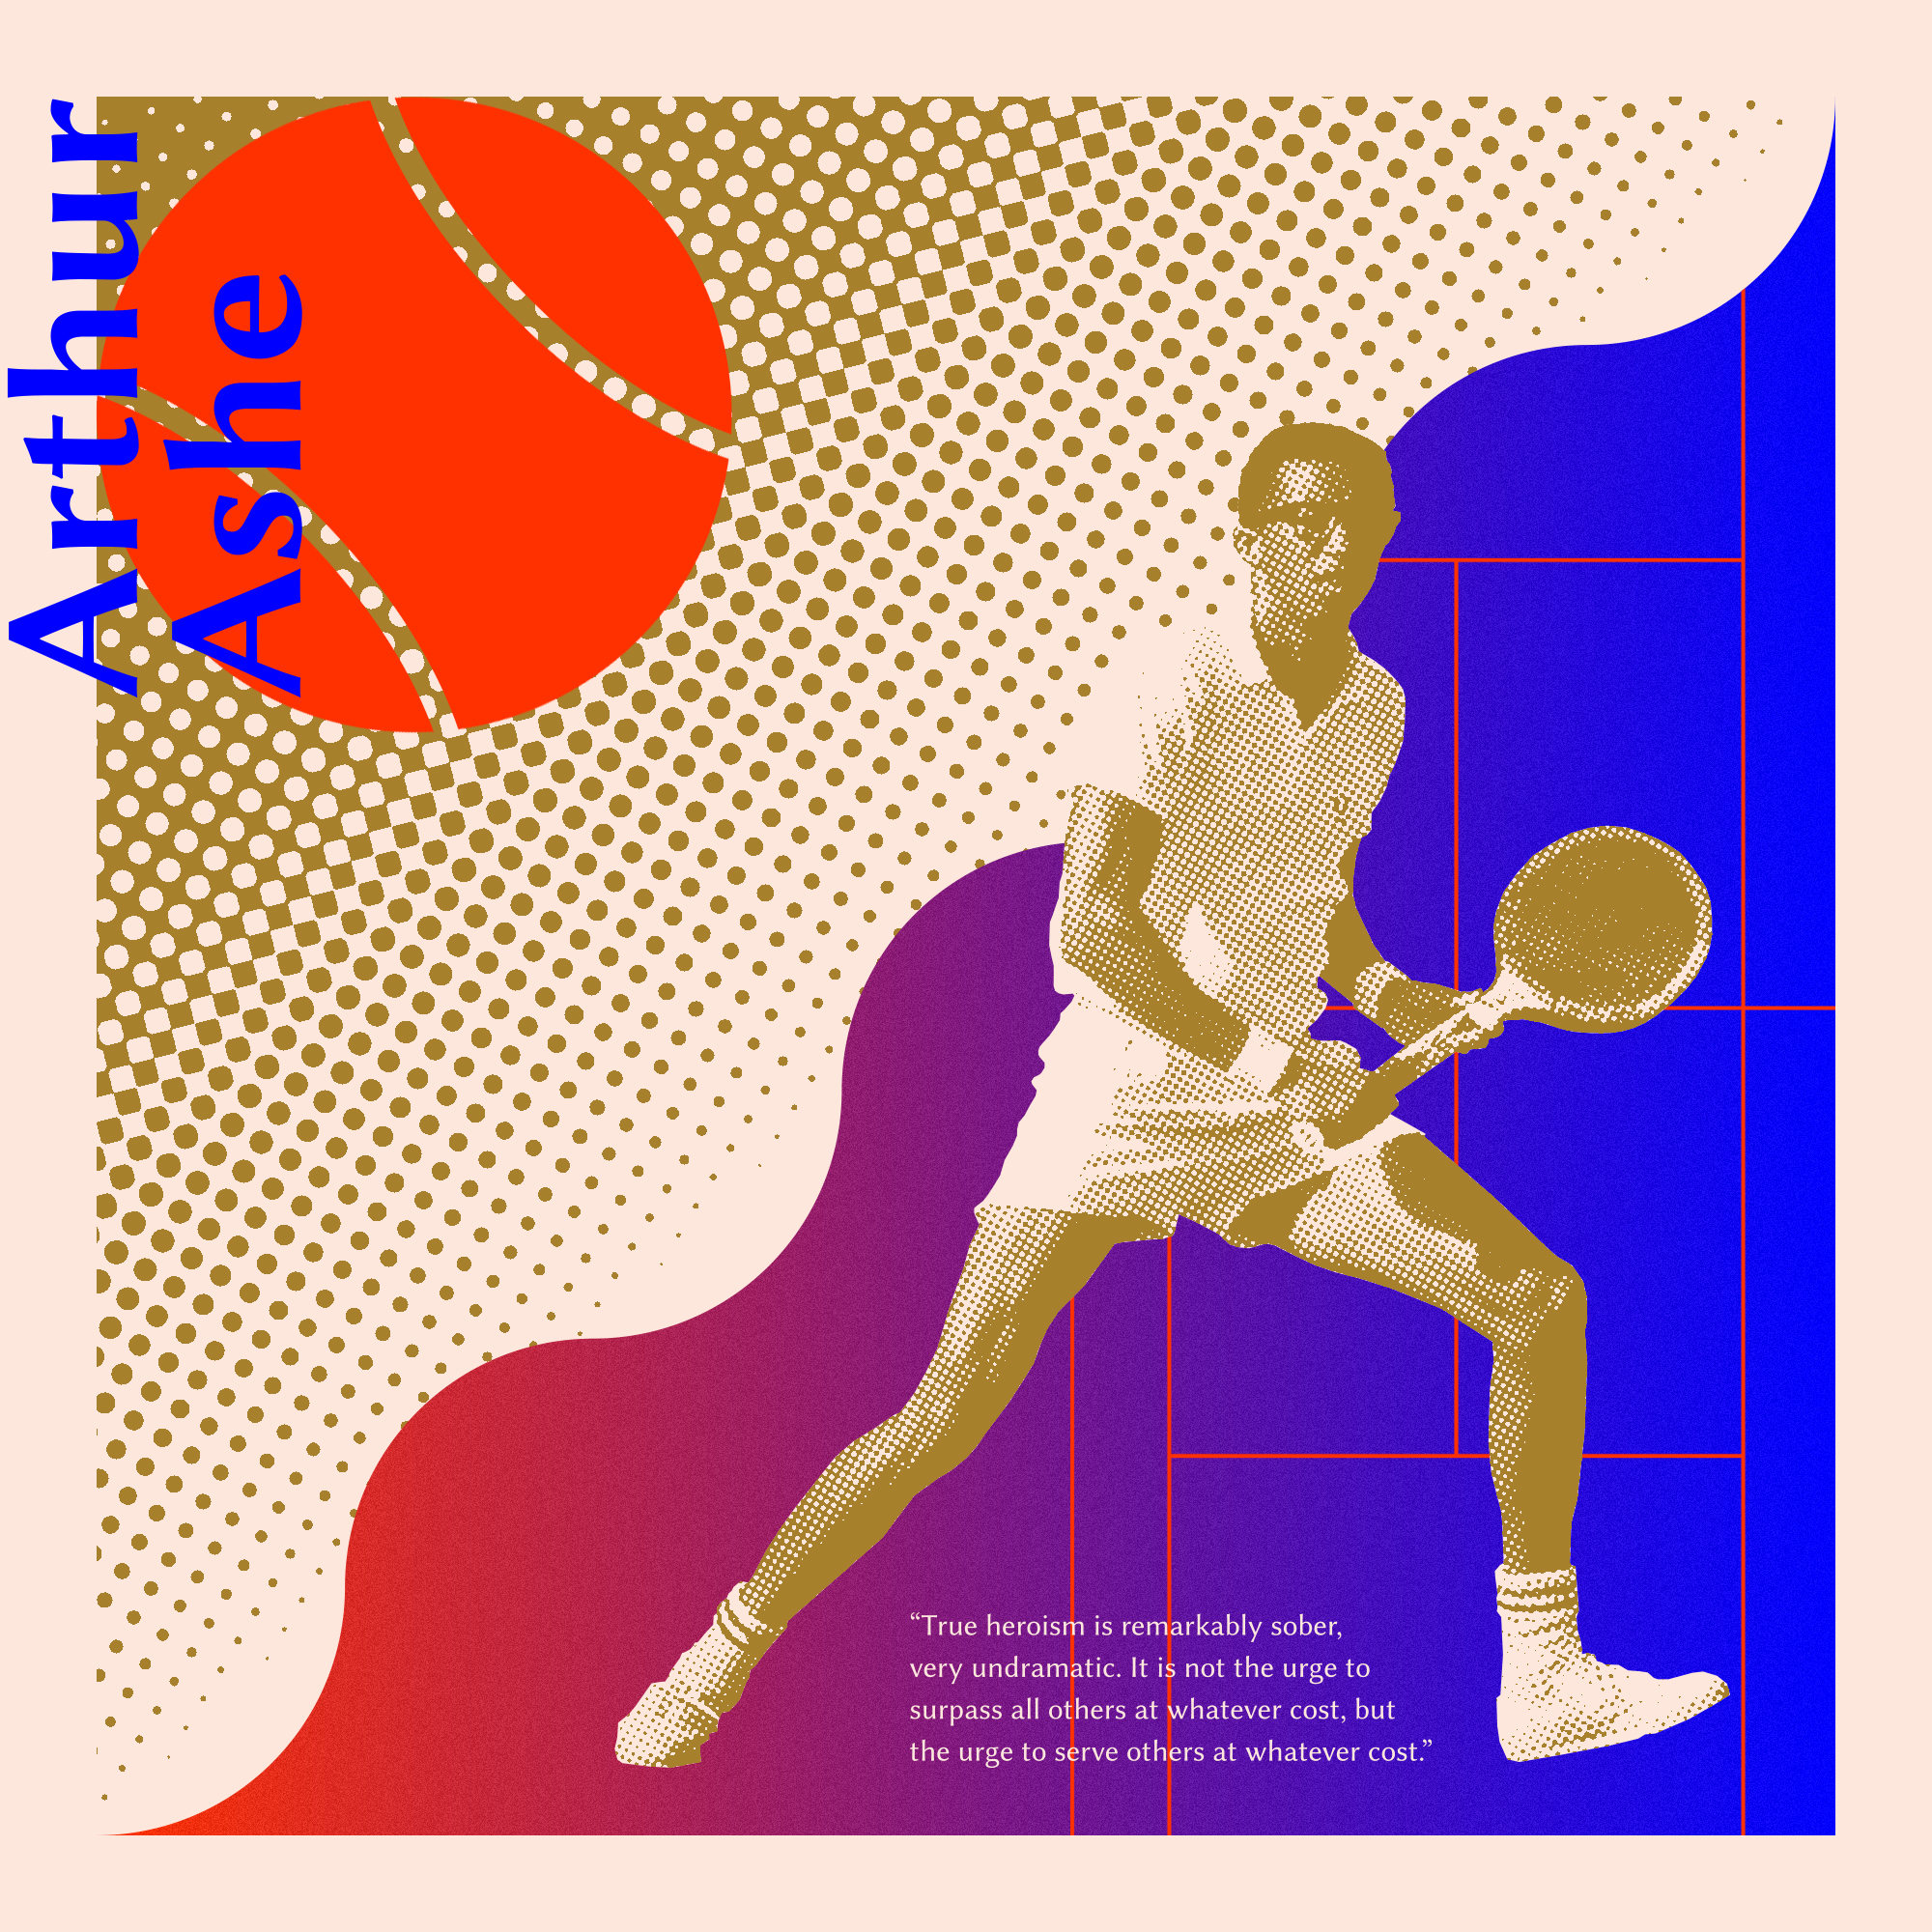 Arthur Ashe by Jacob Scowden on Dribbble